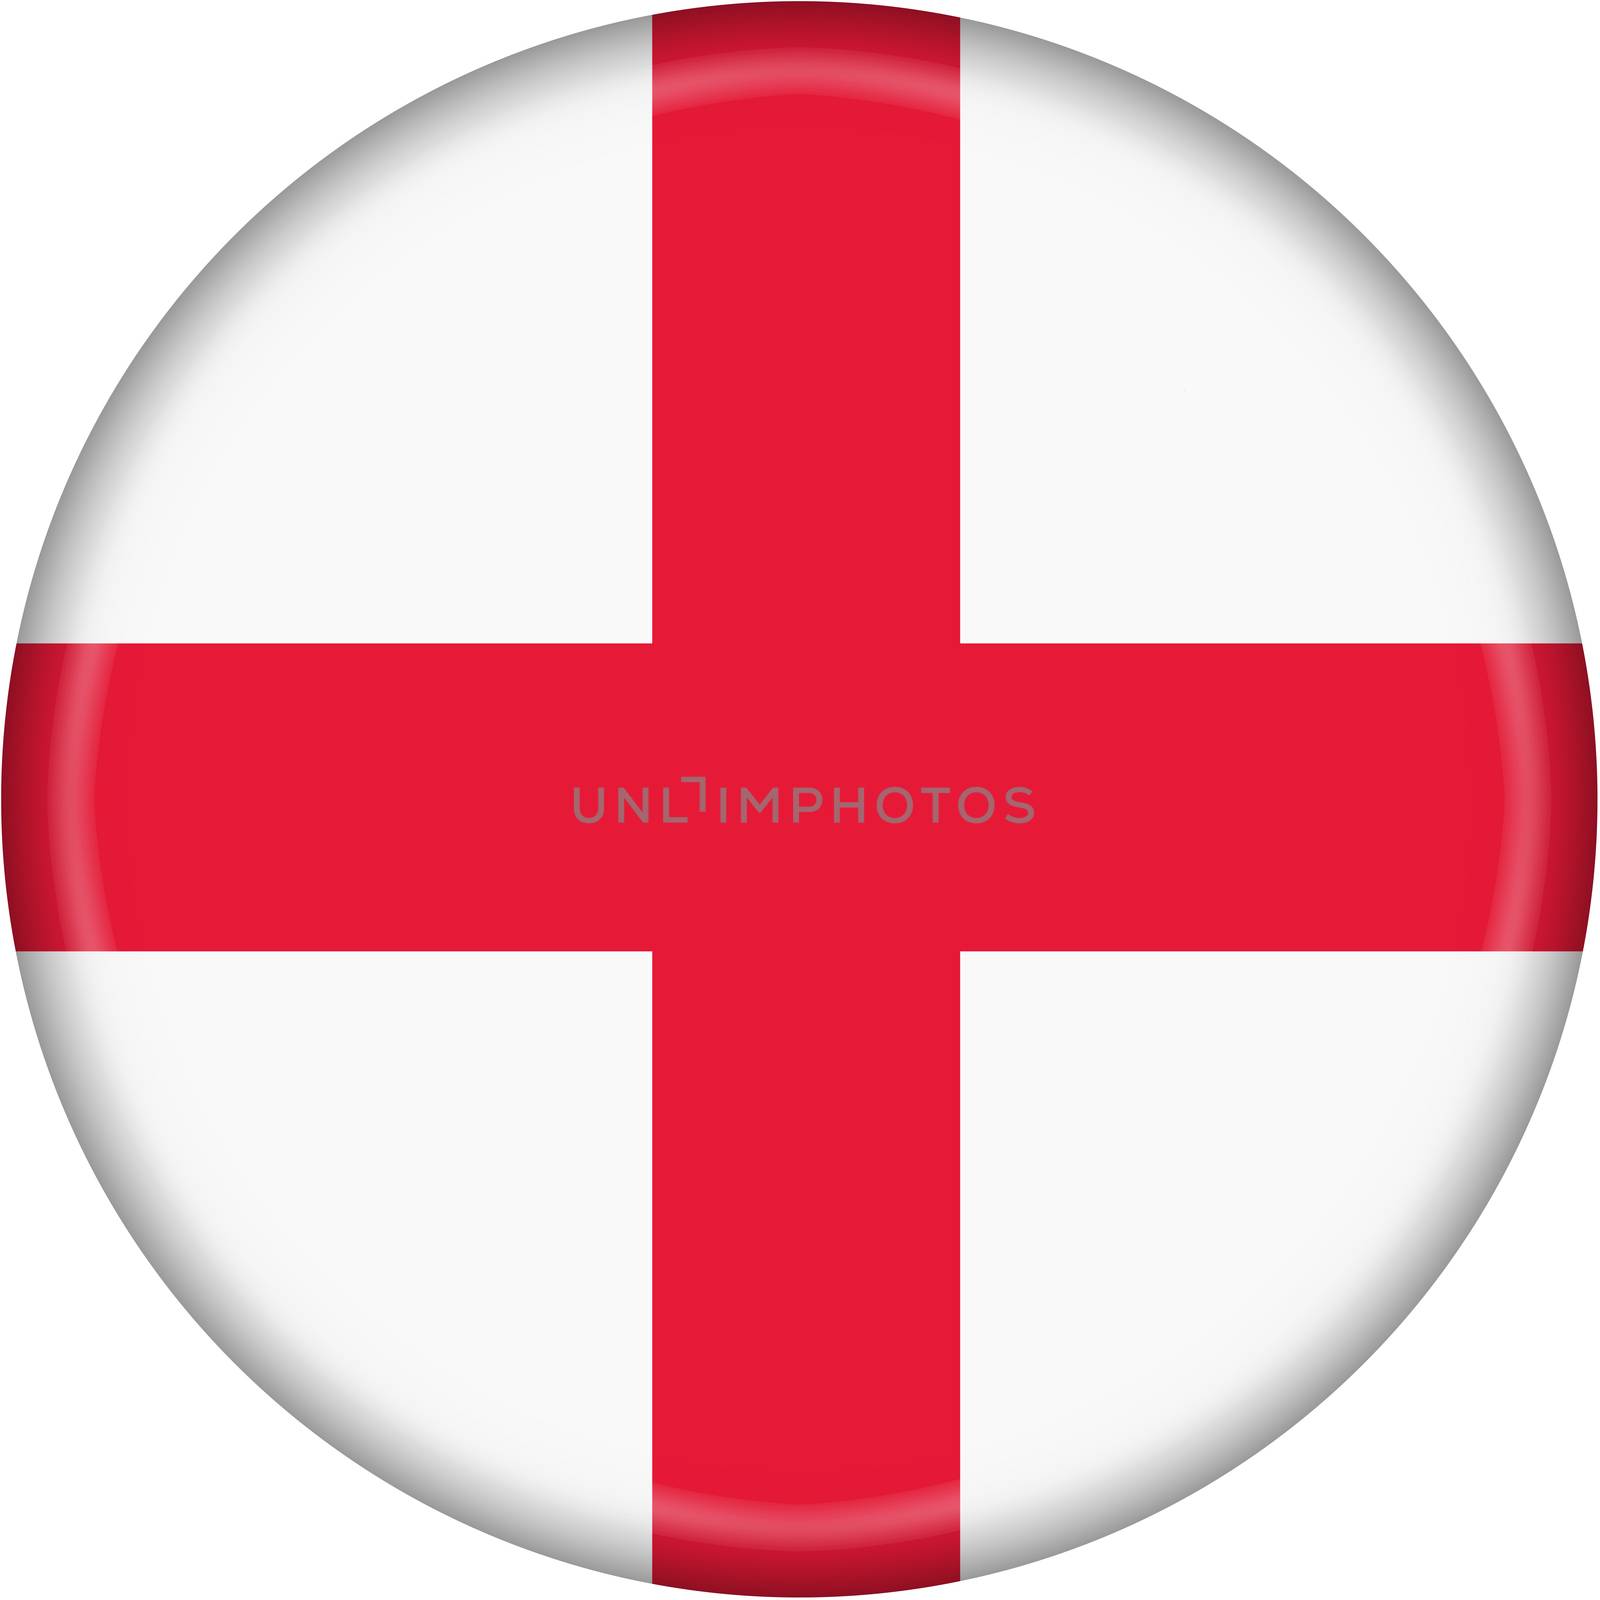 Button featuring the England flag  isolated on a white background with clipping path
